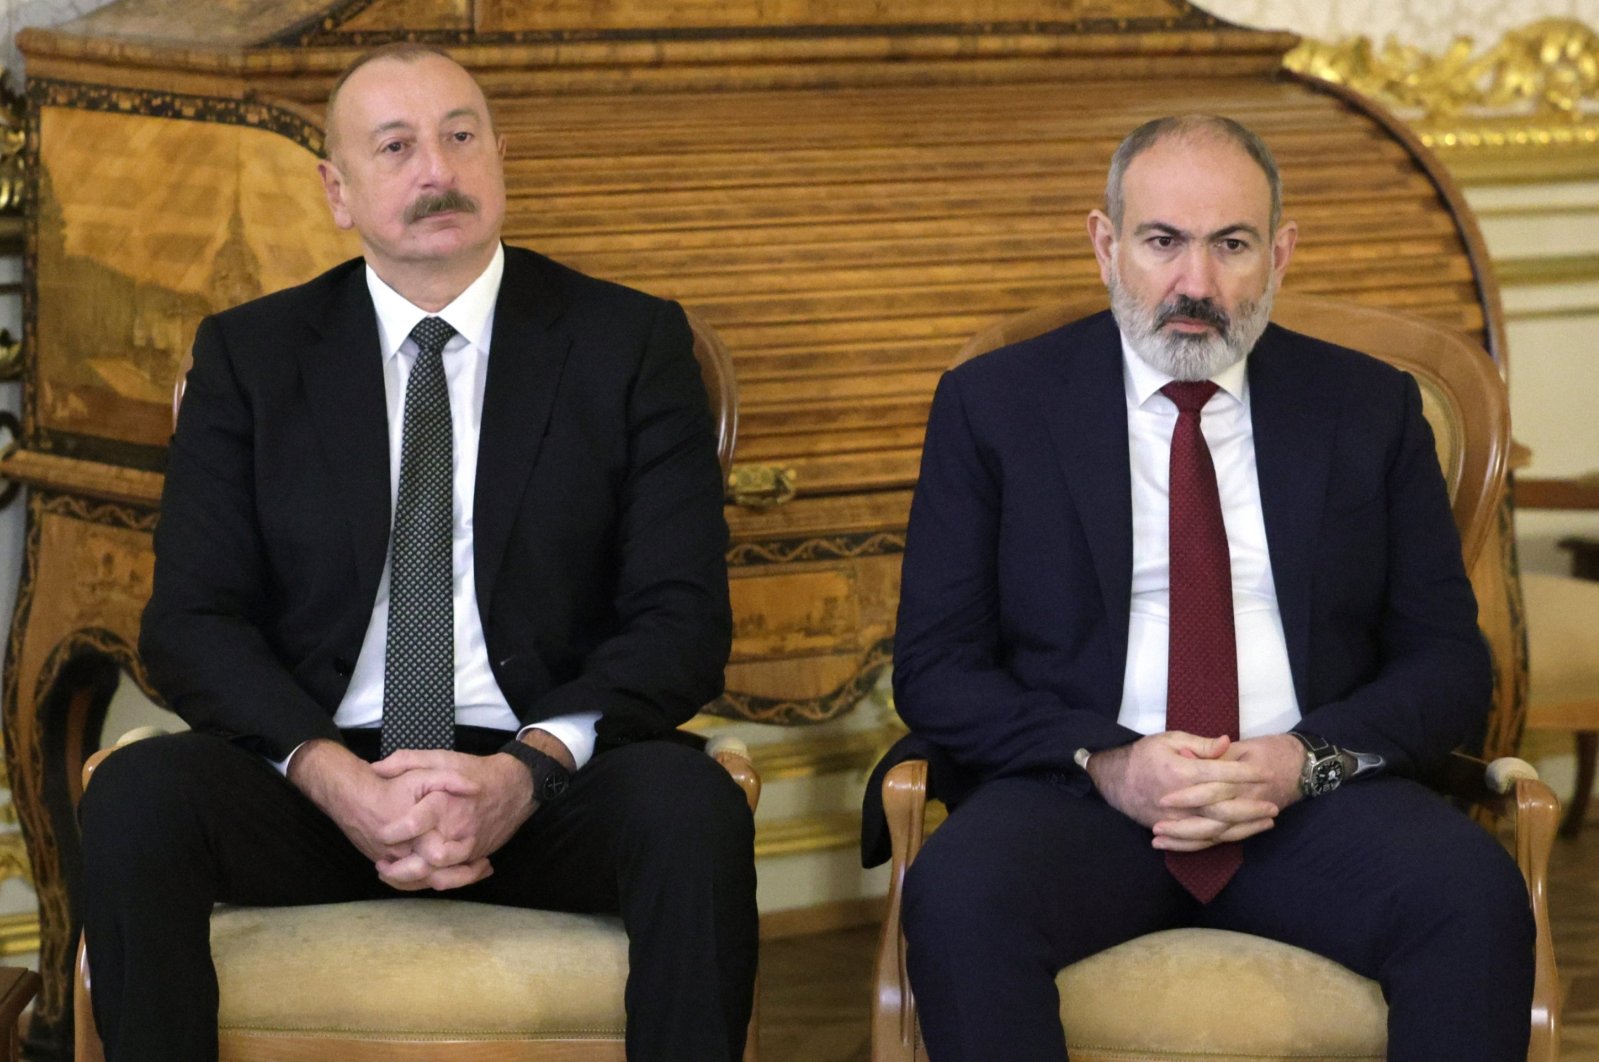 Azerbaijani President Ilham Aliyev (L) and Armenian Prime Minister Nikol Pashinyan are seen during a visit to the Catherine Palace at the Tsarskoye Selo State Museum and Reserve in Pushkin, St. Petersburg, Russia, Dec. 26, 2023. (EPA Photo)